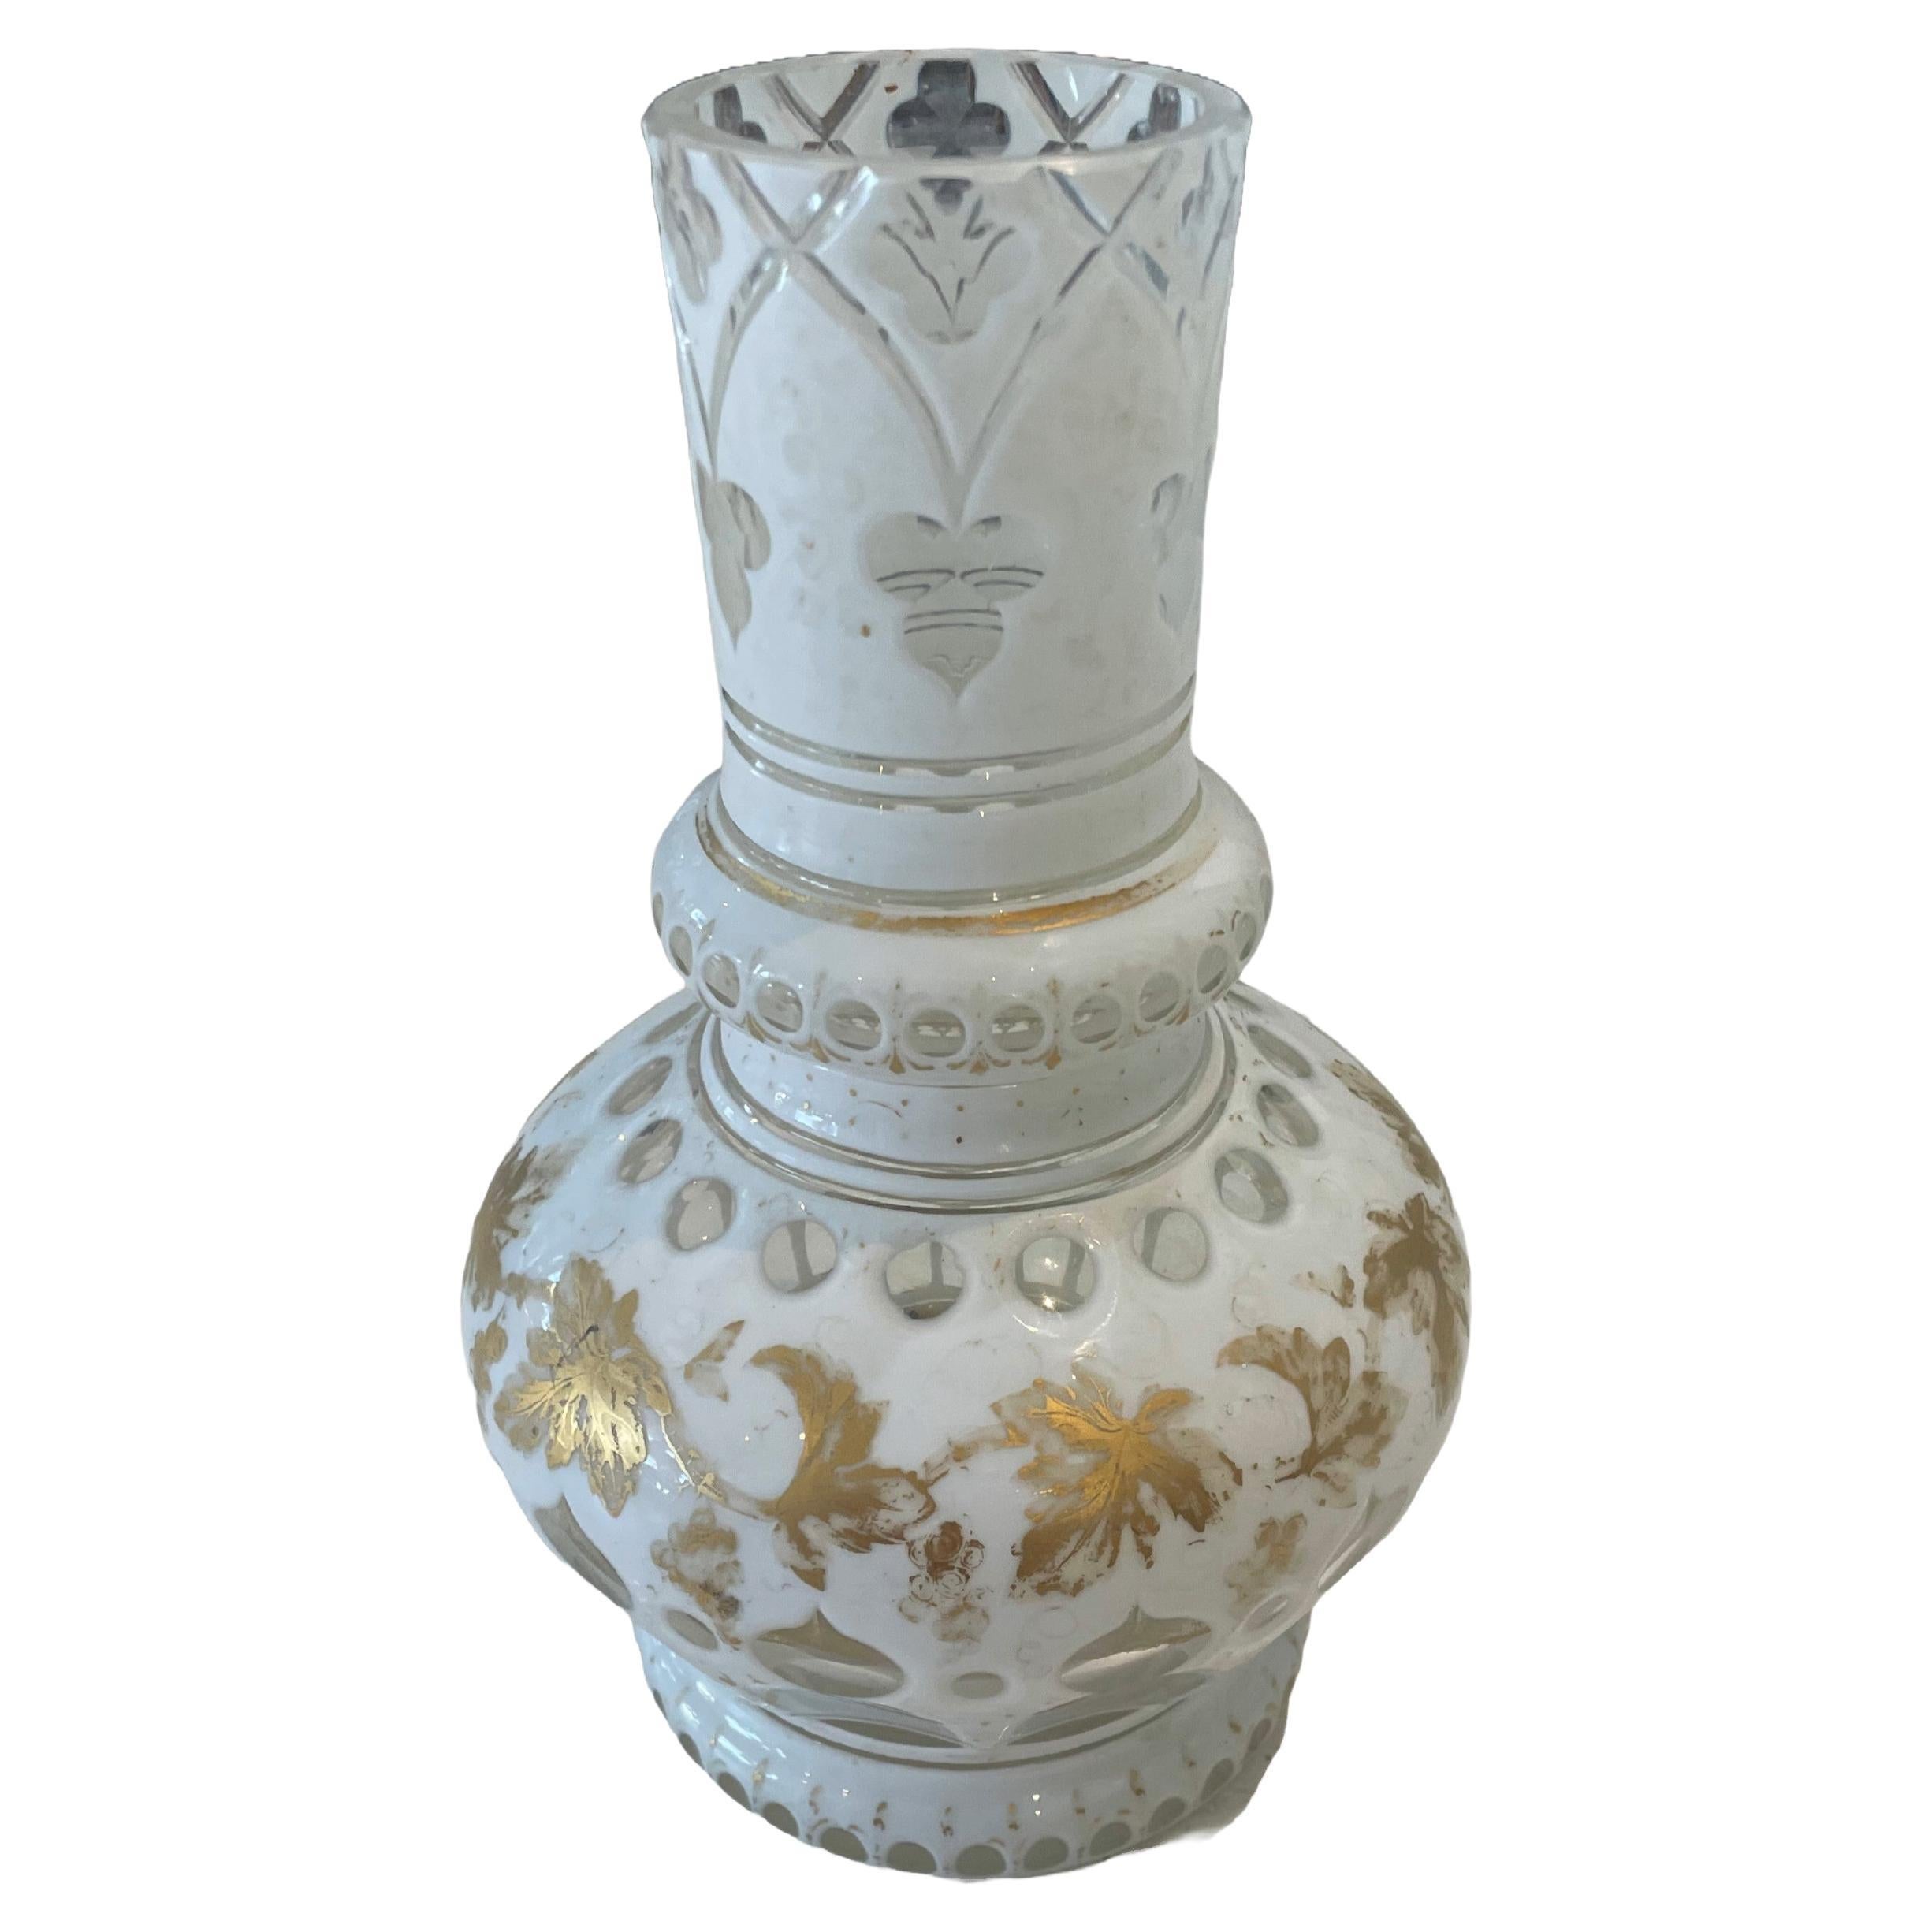 Antique 19th Century Bohemian White and Gold Overlay Glassware Vase For Sale